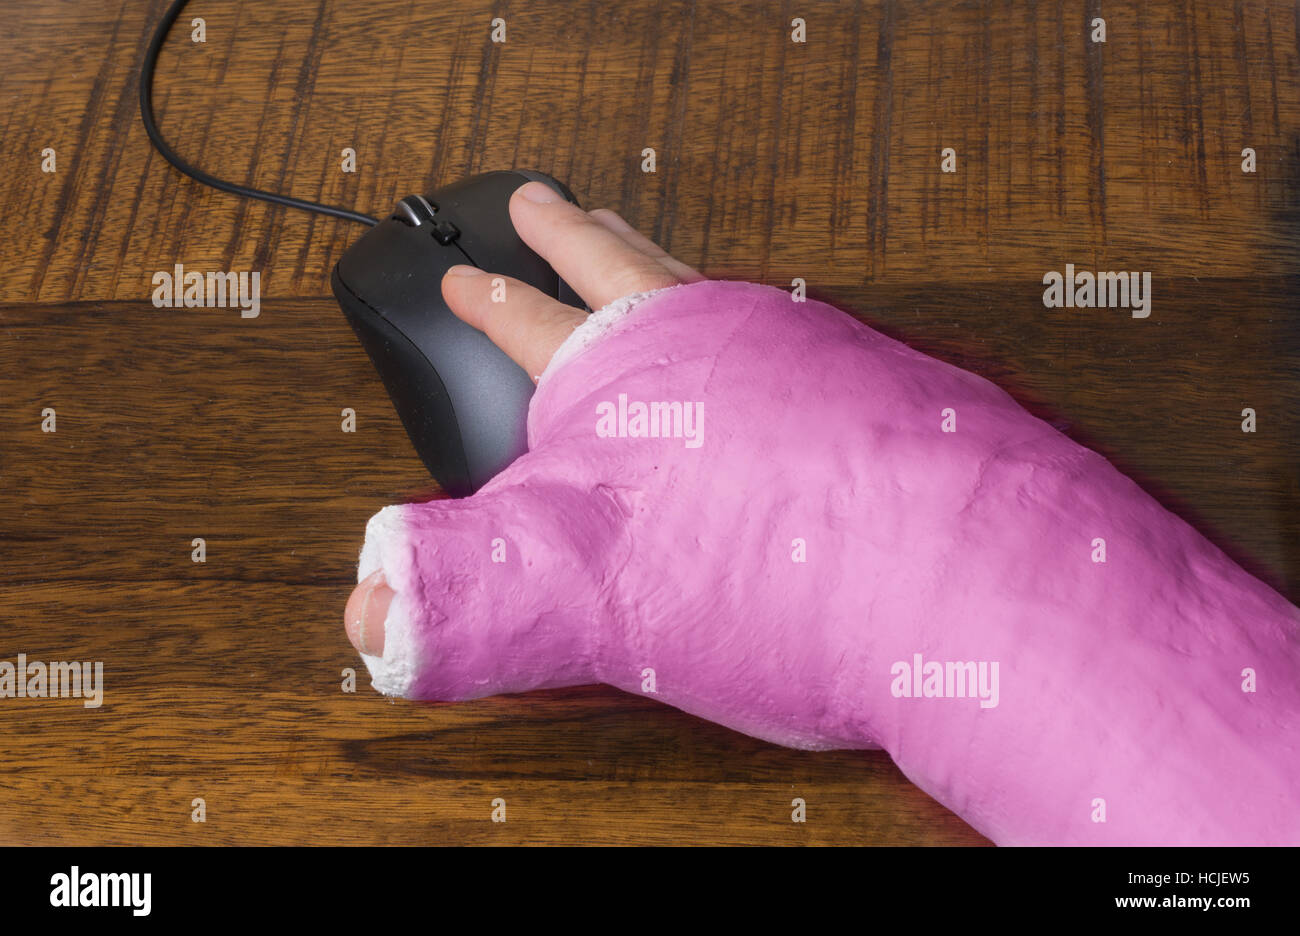 A person wearing an arm cast after breaking their wrist having difficulty using a computer mouse Stock Photo